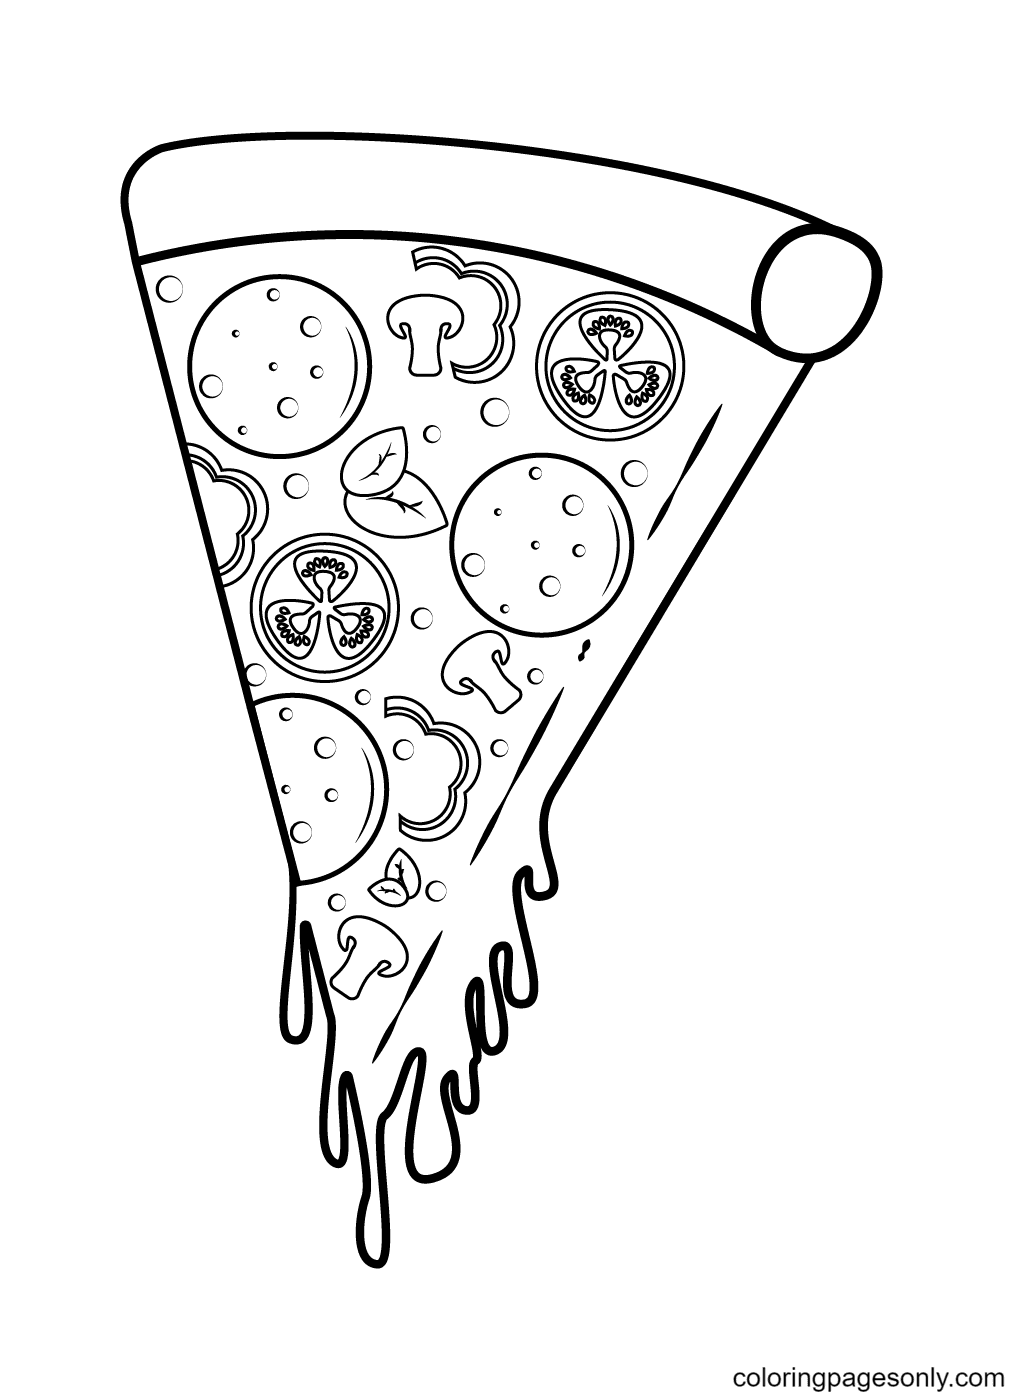 That Dripping Melted Mozzarella Cheese So Mouth-watering Coloring Pages